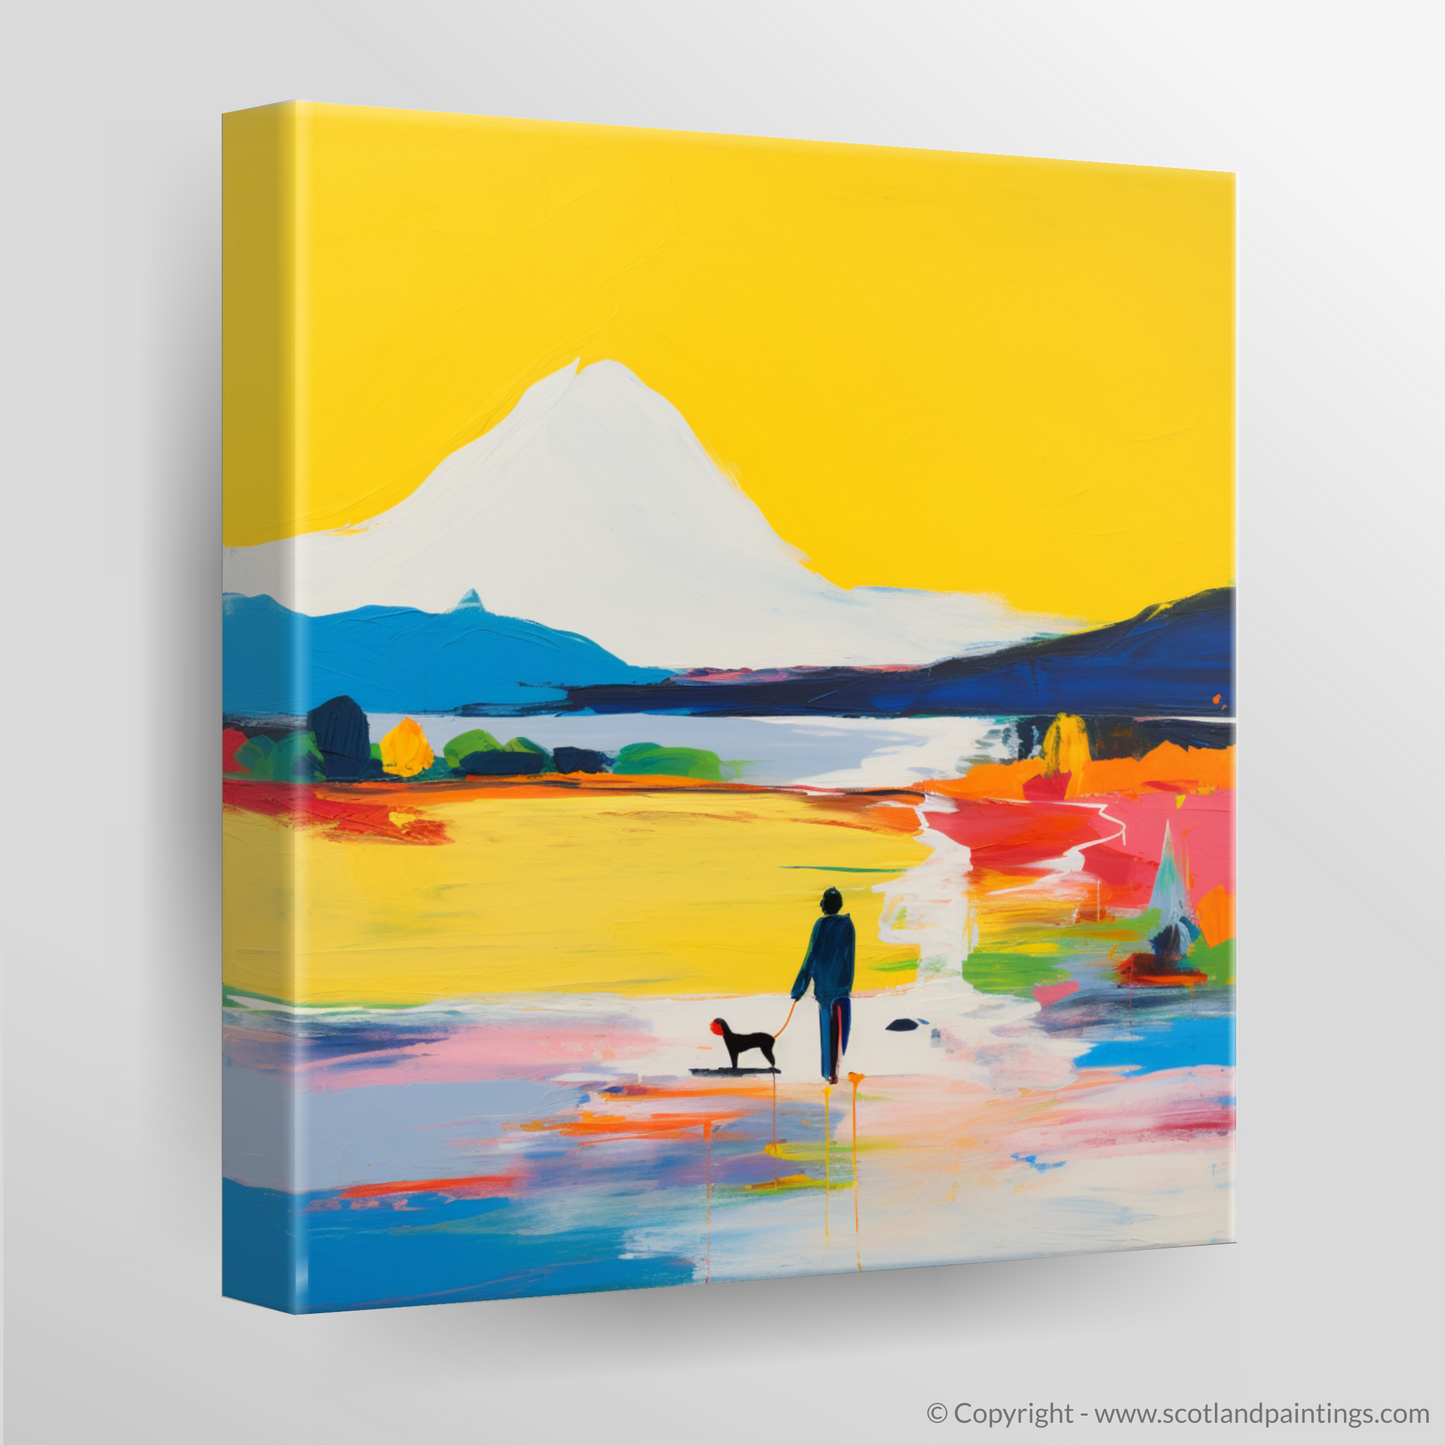 Canvas Print of A man walking dog at the side of Loch Lomond